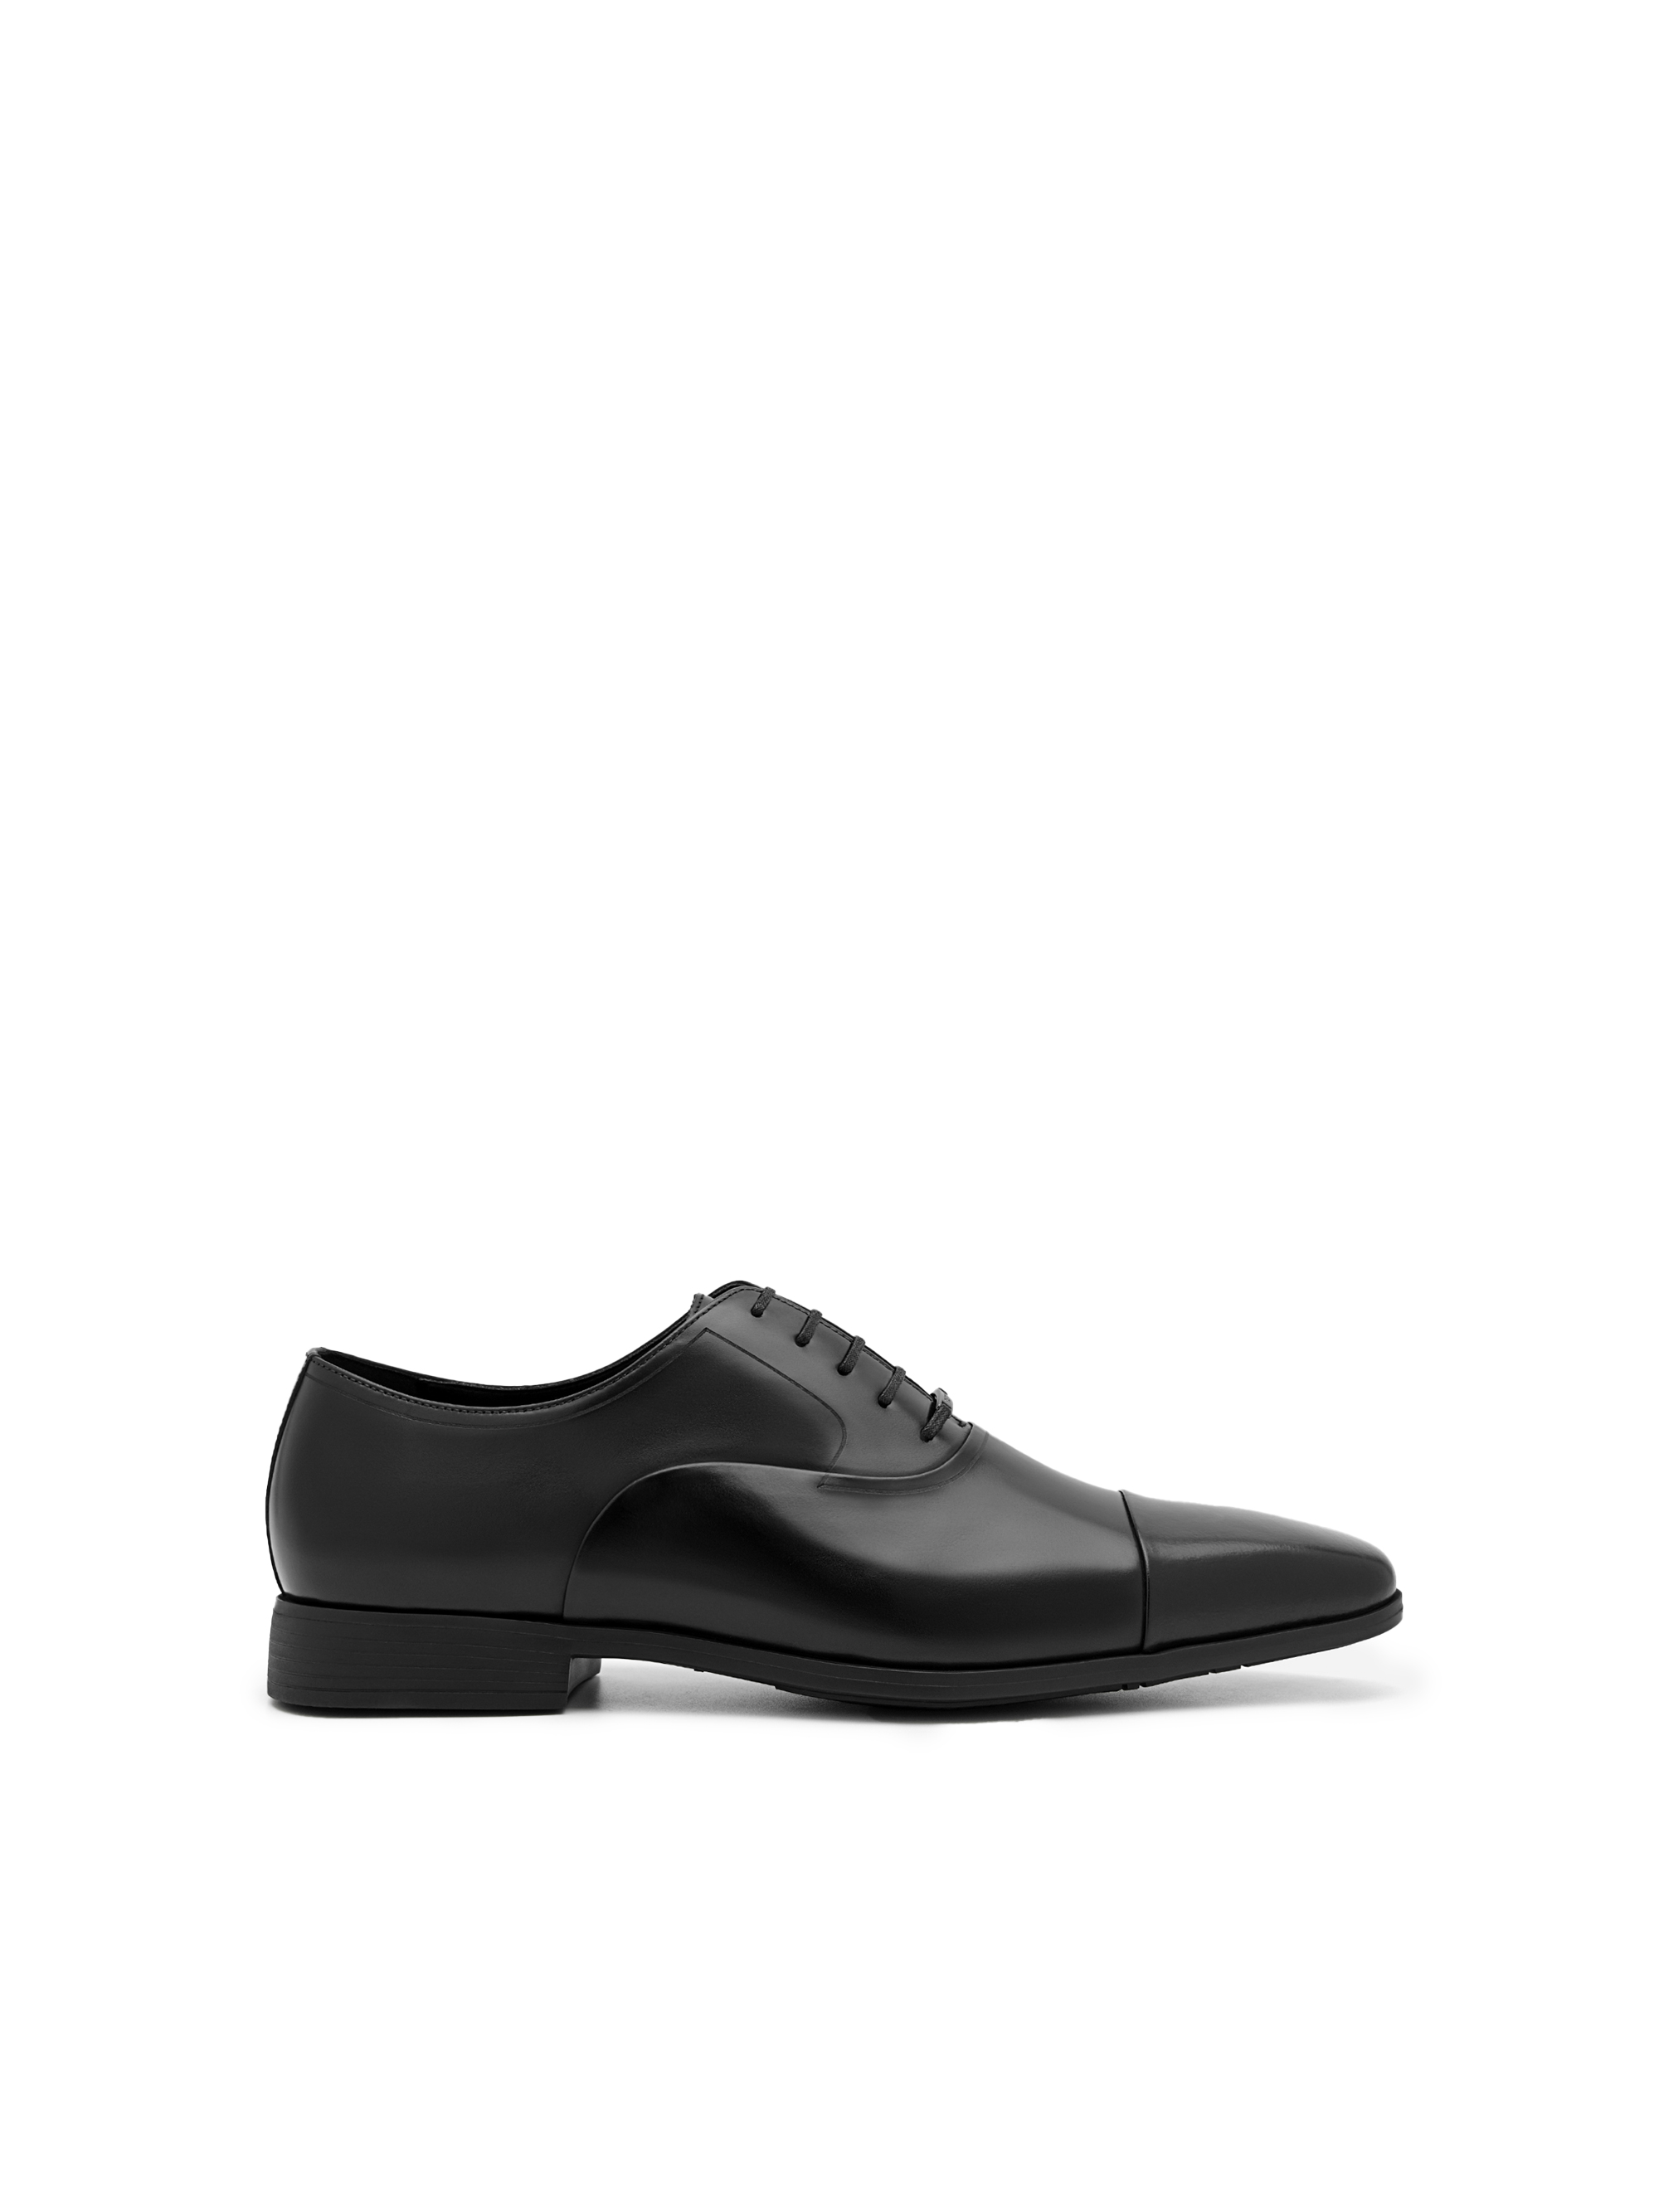 Men’s Formal & Casual Shoes In Singapore | PEDRO SG